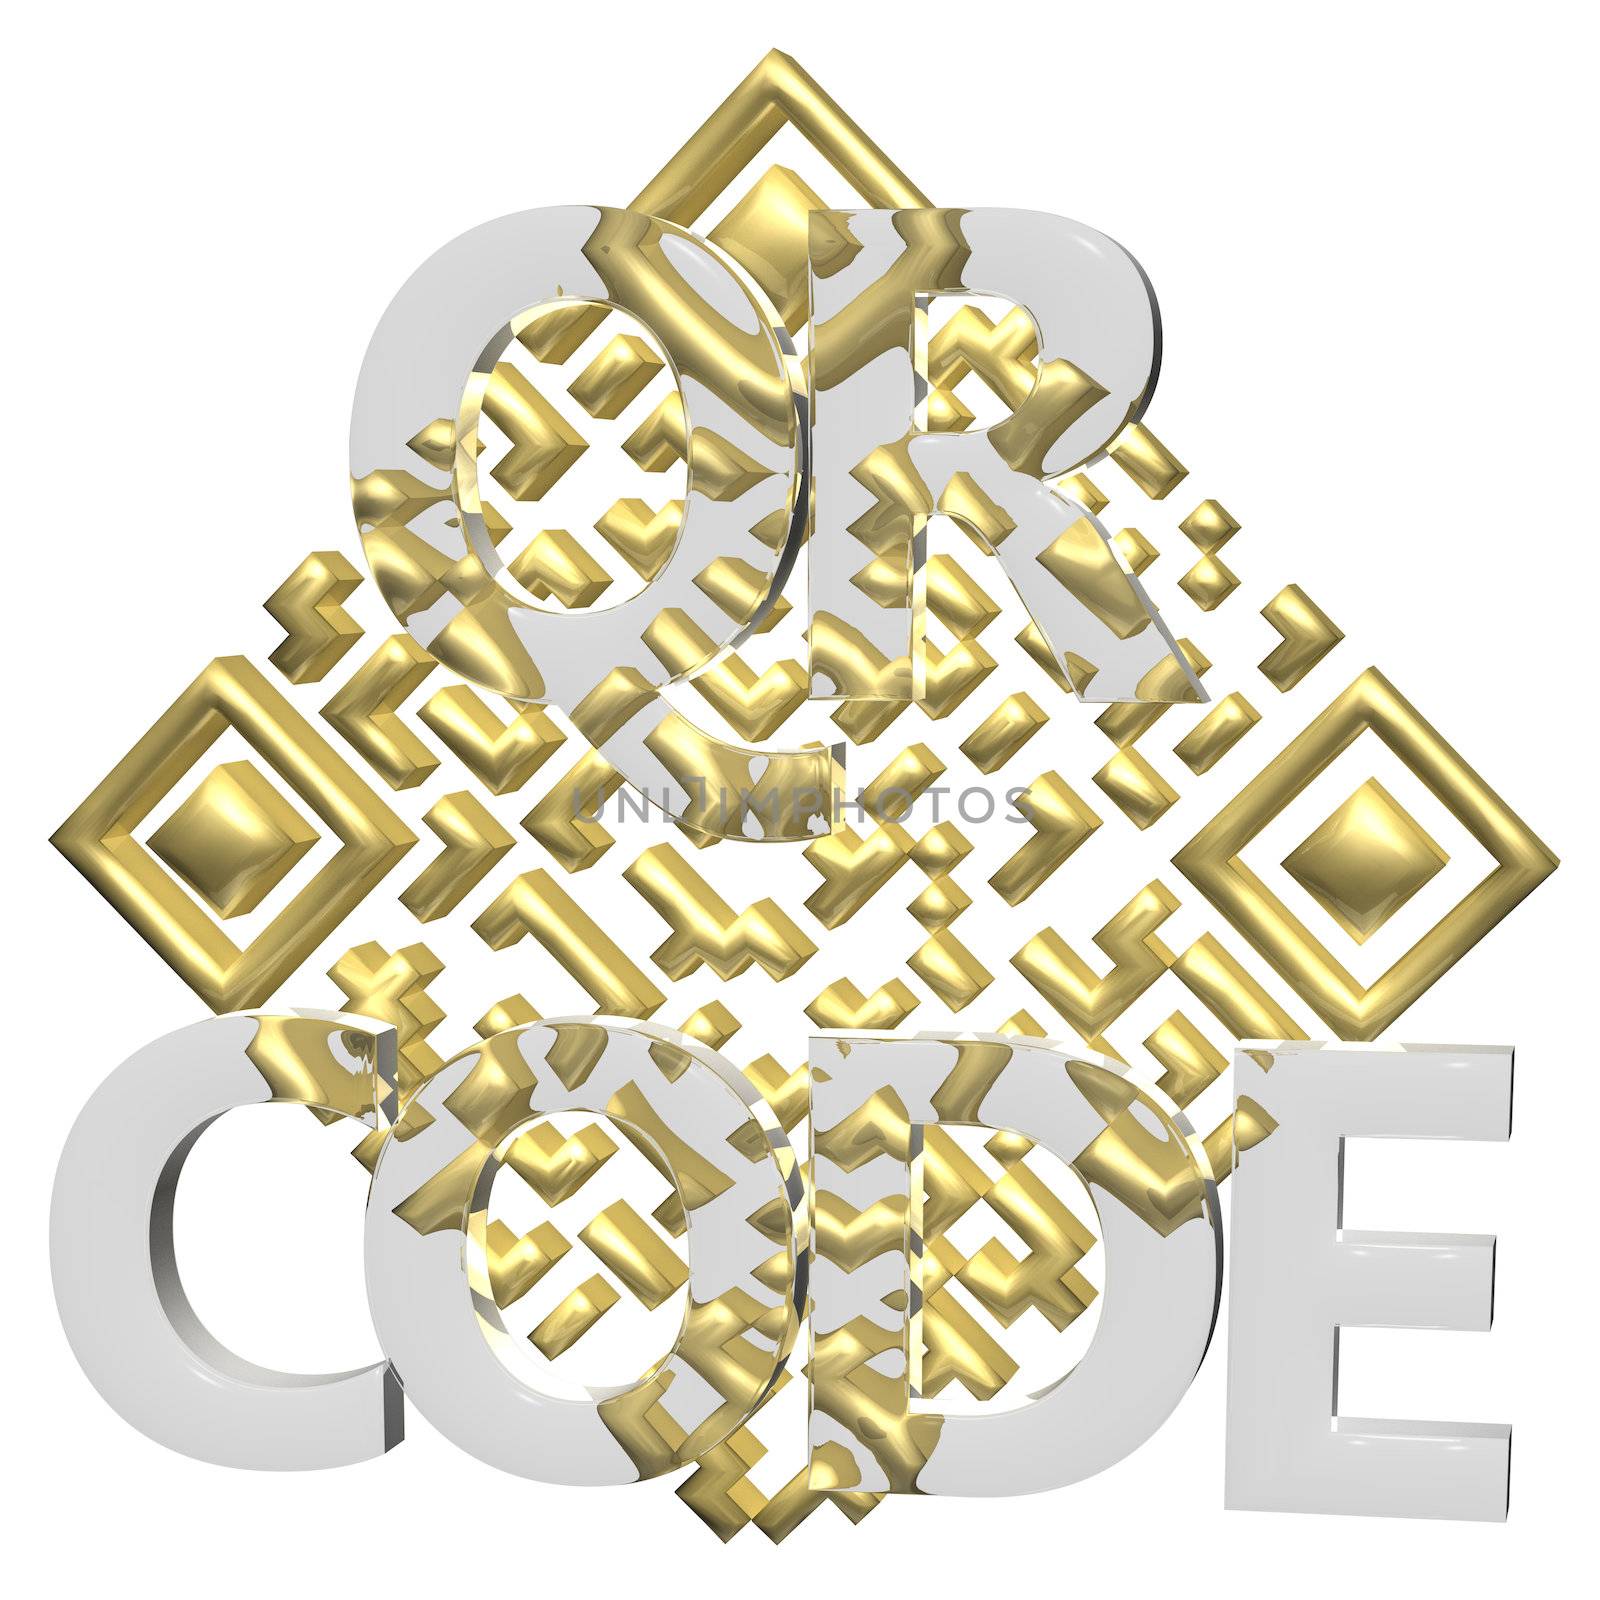 Abstract example of a three-dimensional QR code as a background